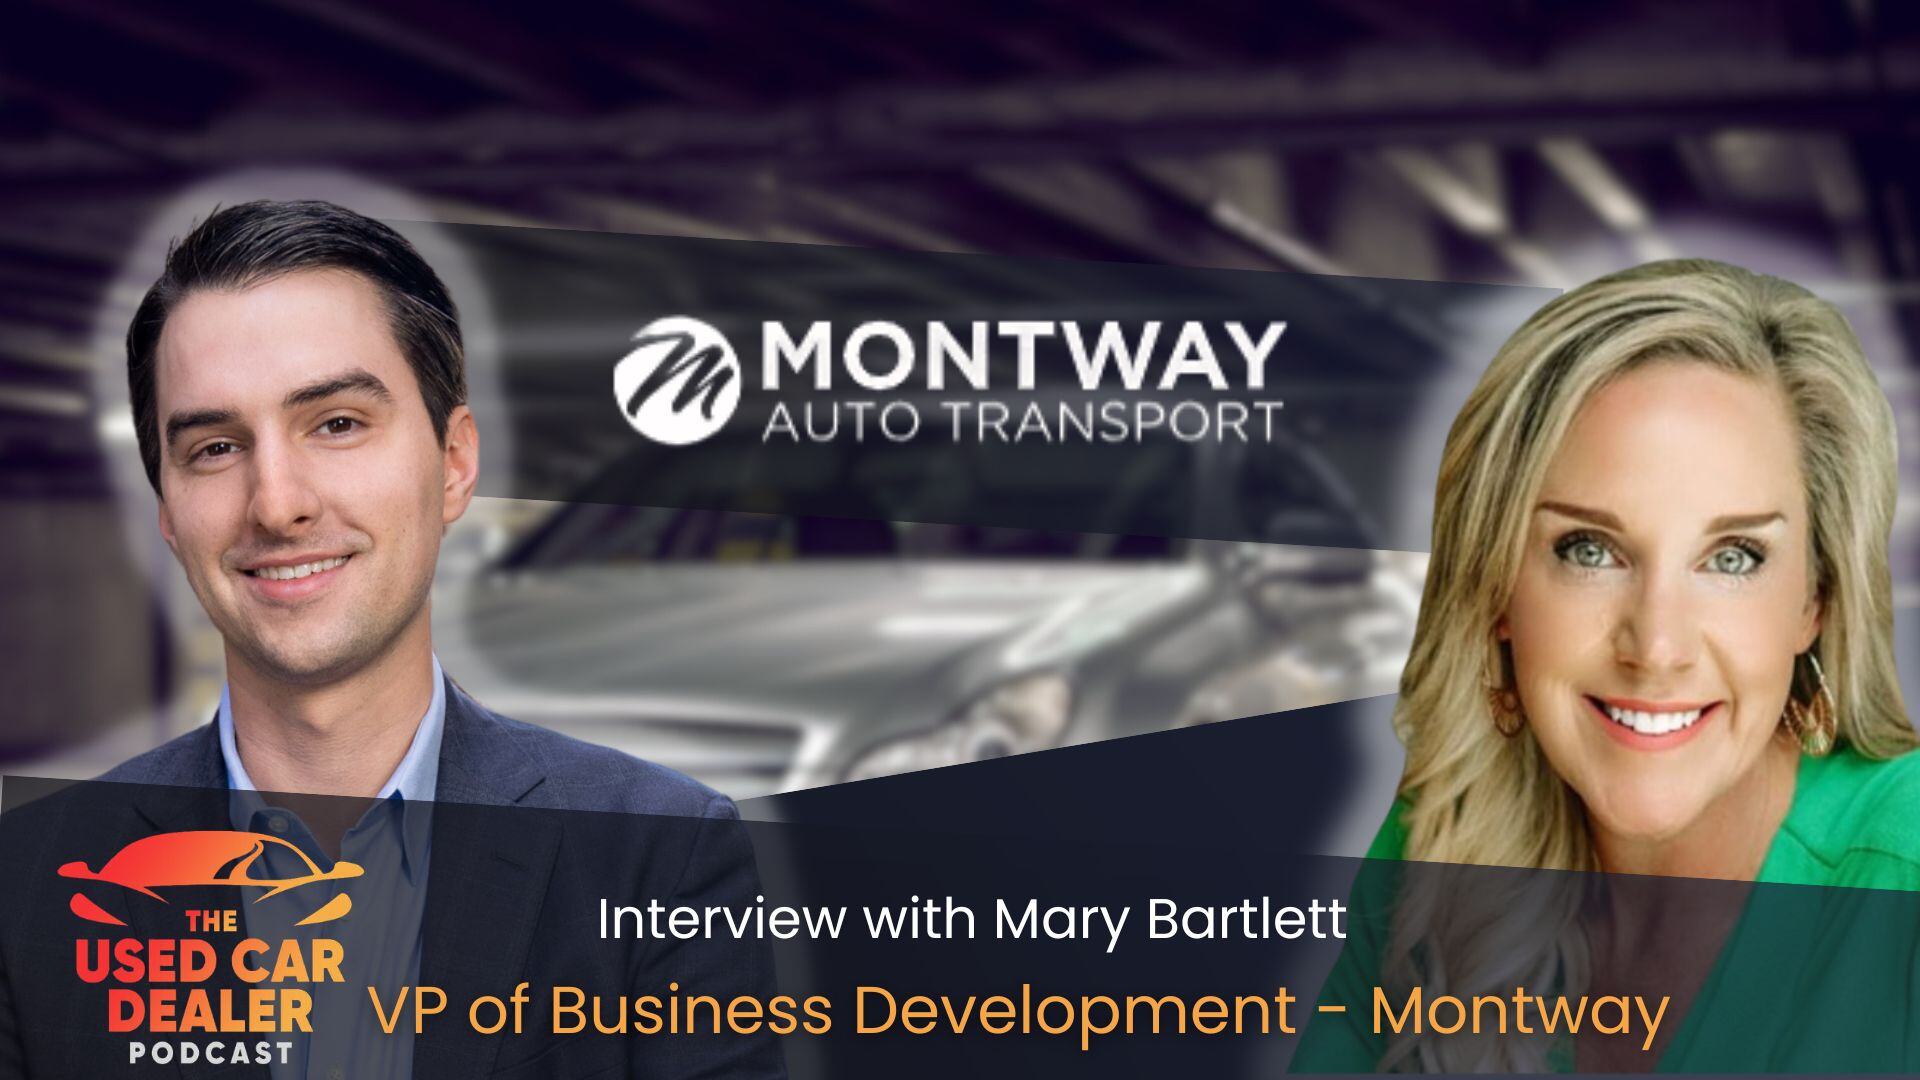 Interview with Mary Bartlett, VP of Business Development at Montway